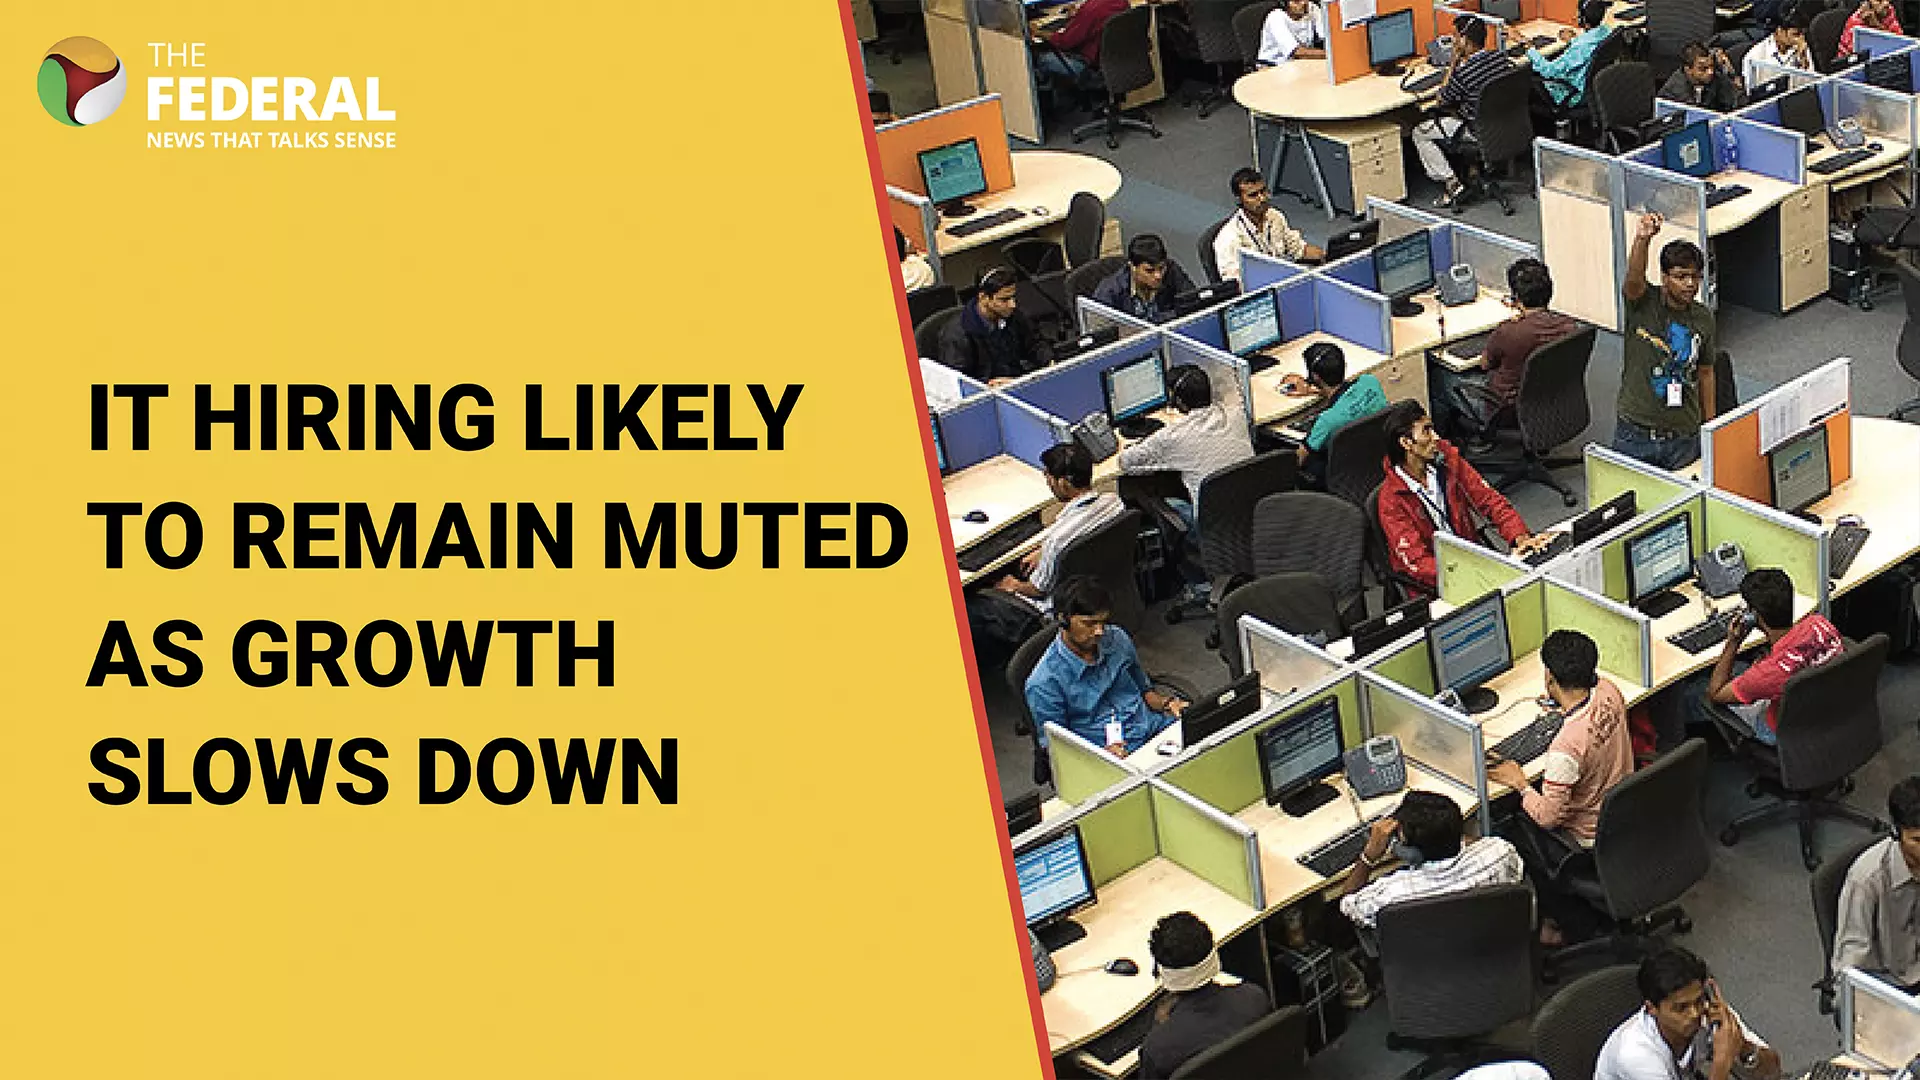 IT hiring likely to remain muted as growth slows down